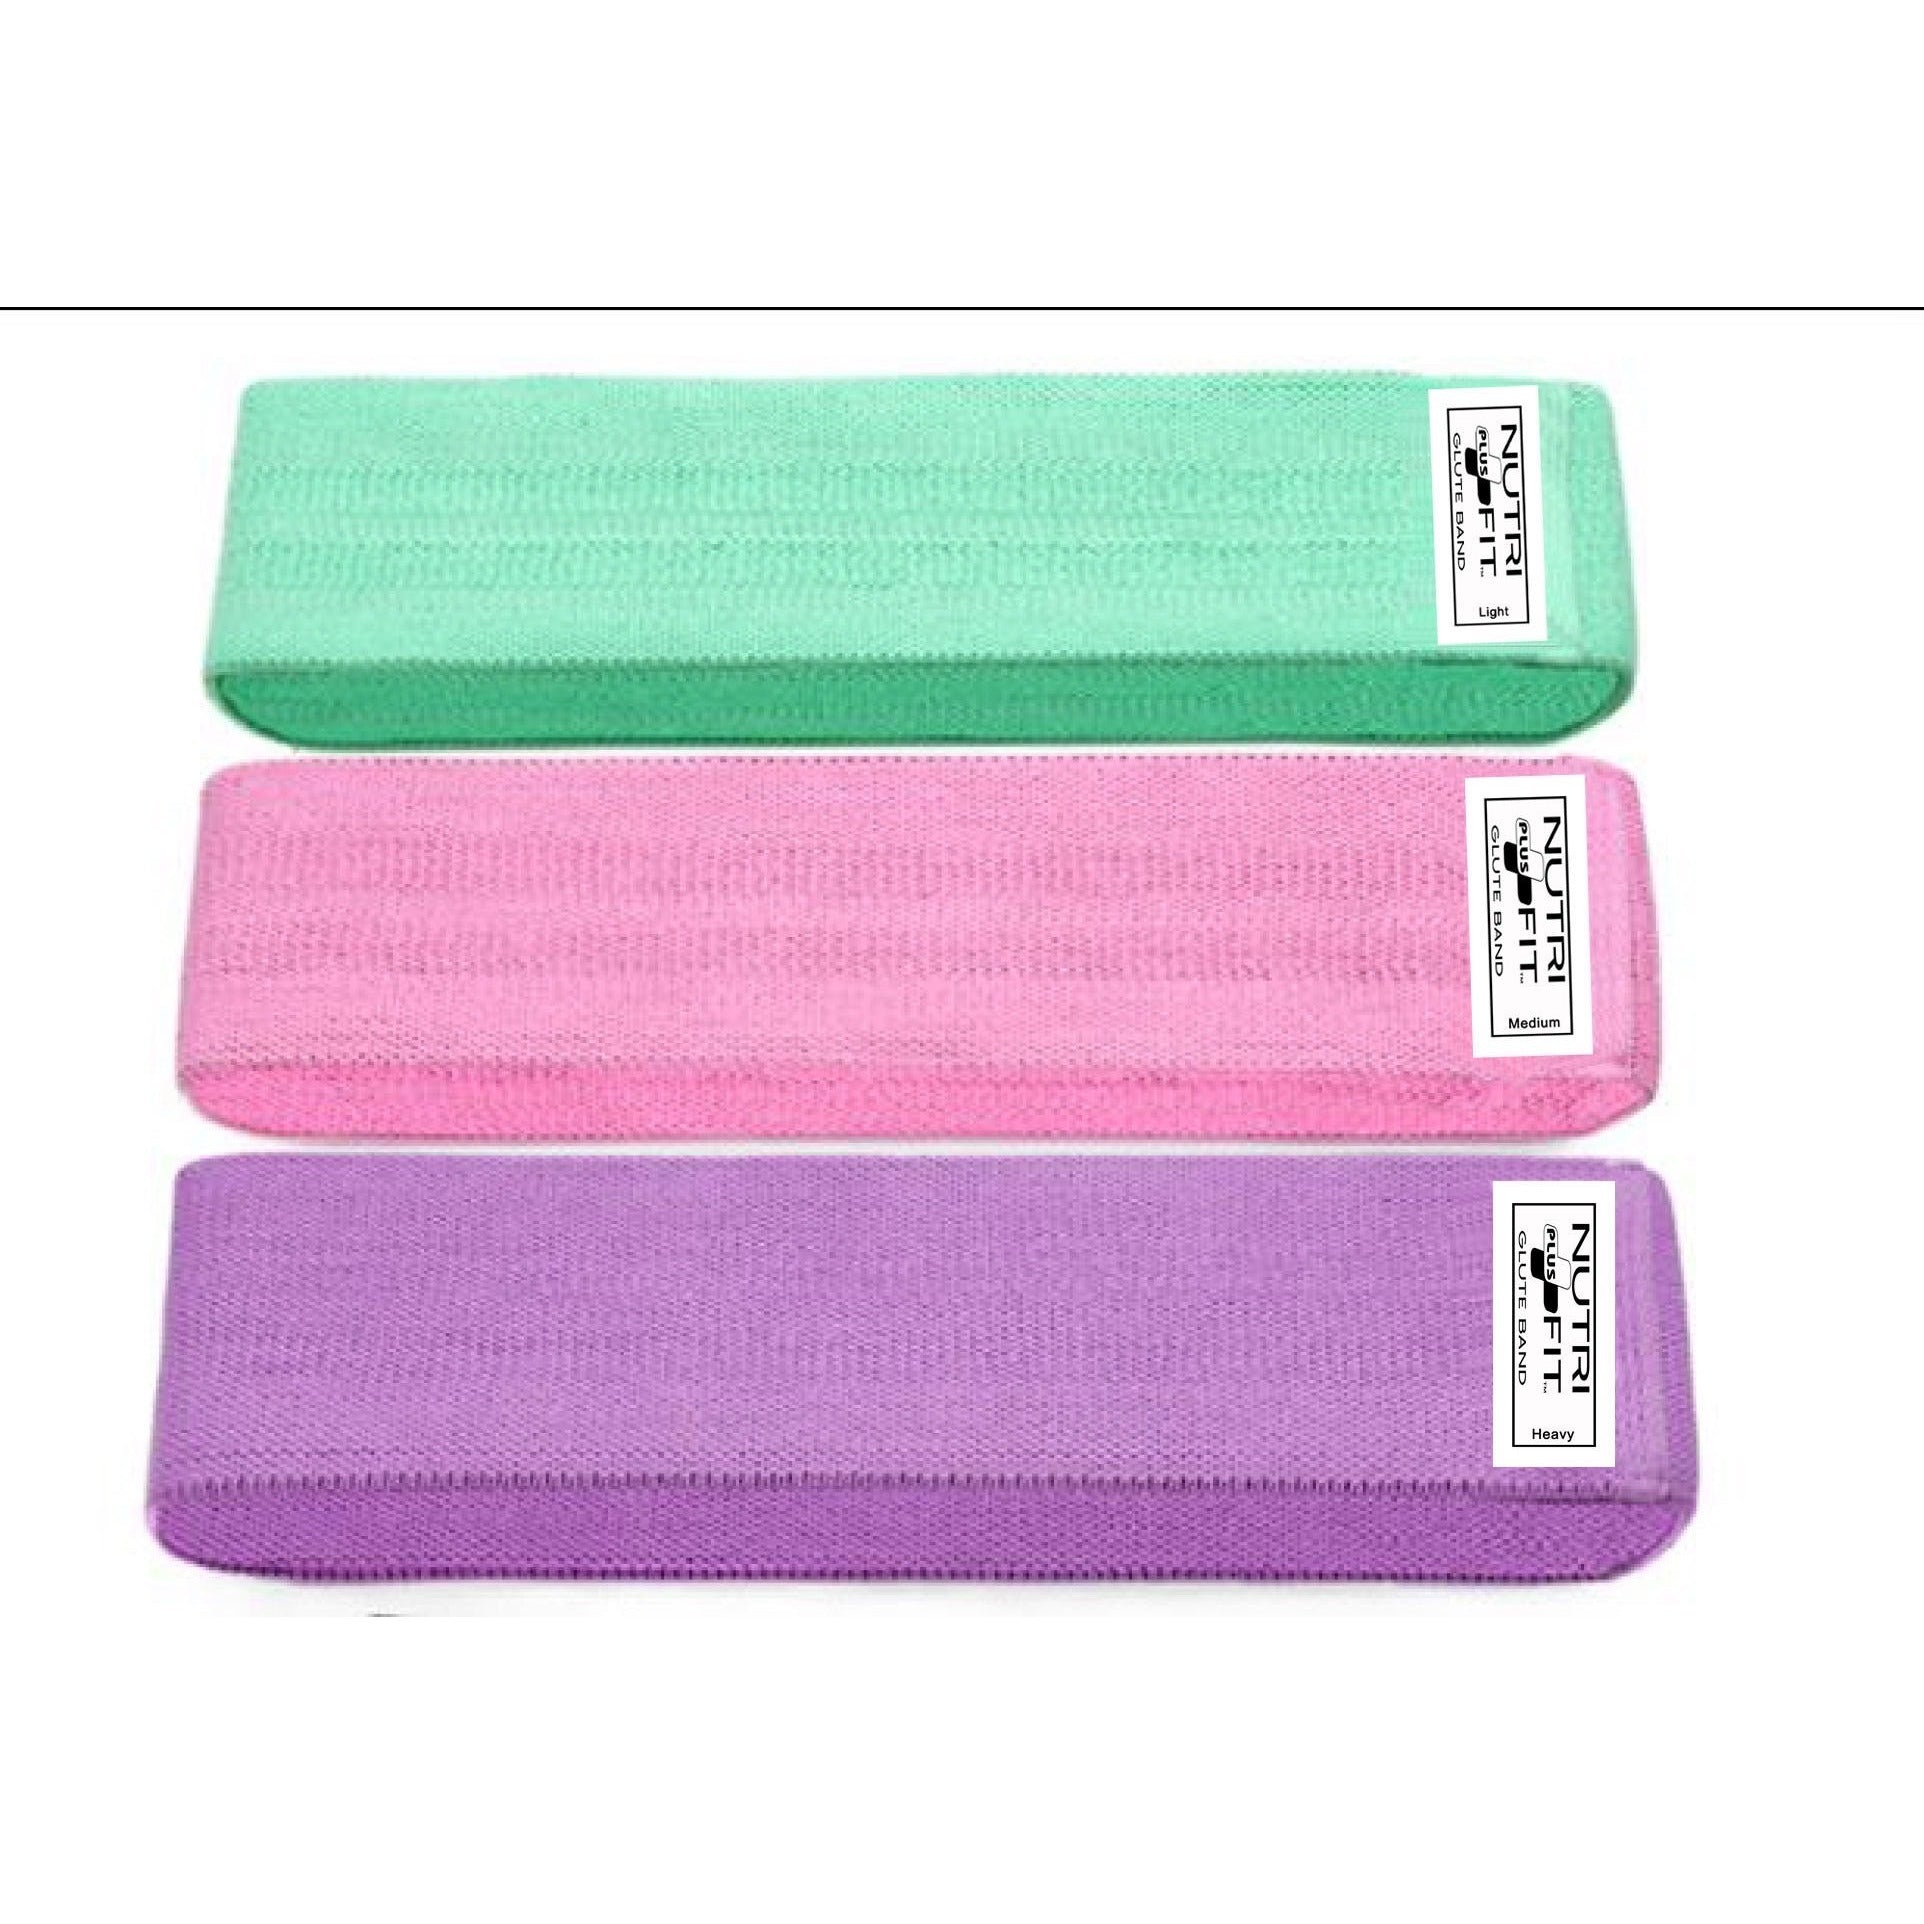 NutriFit Plus Resistance Bands Set - 3 Booty Bands for Legs and Glutes